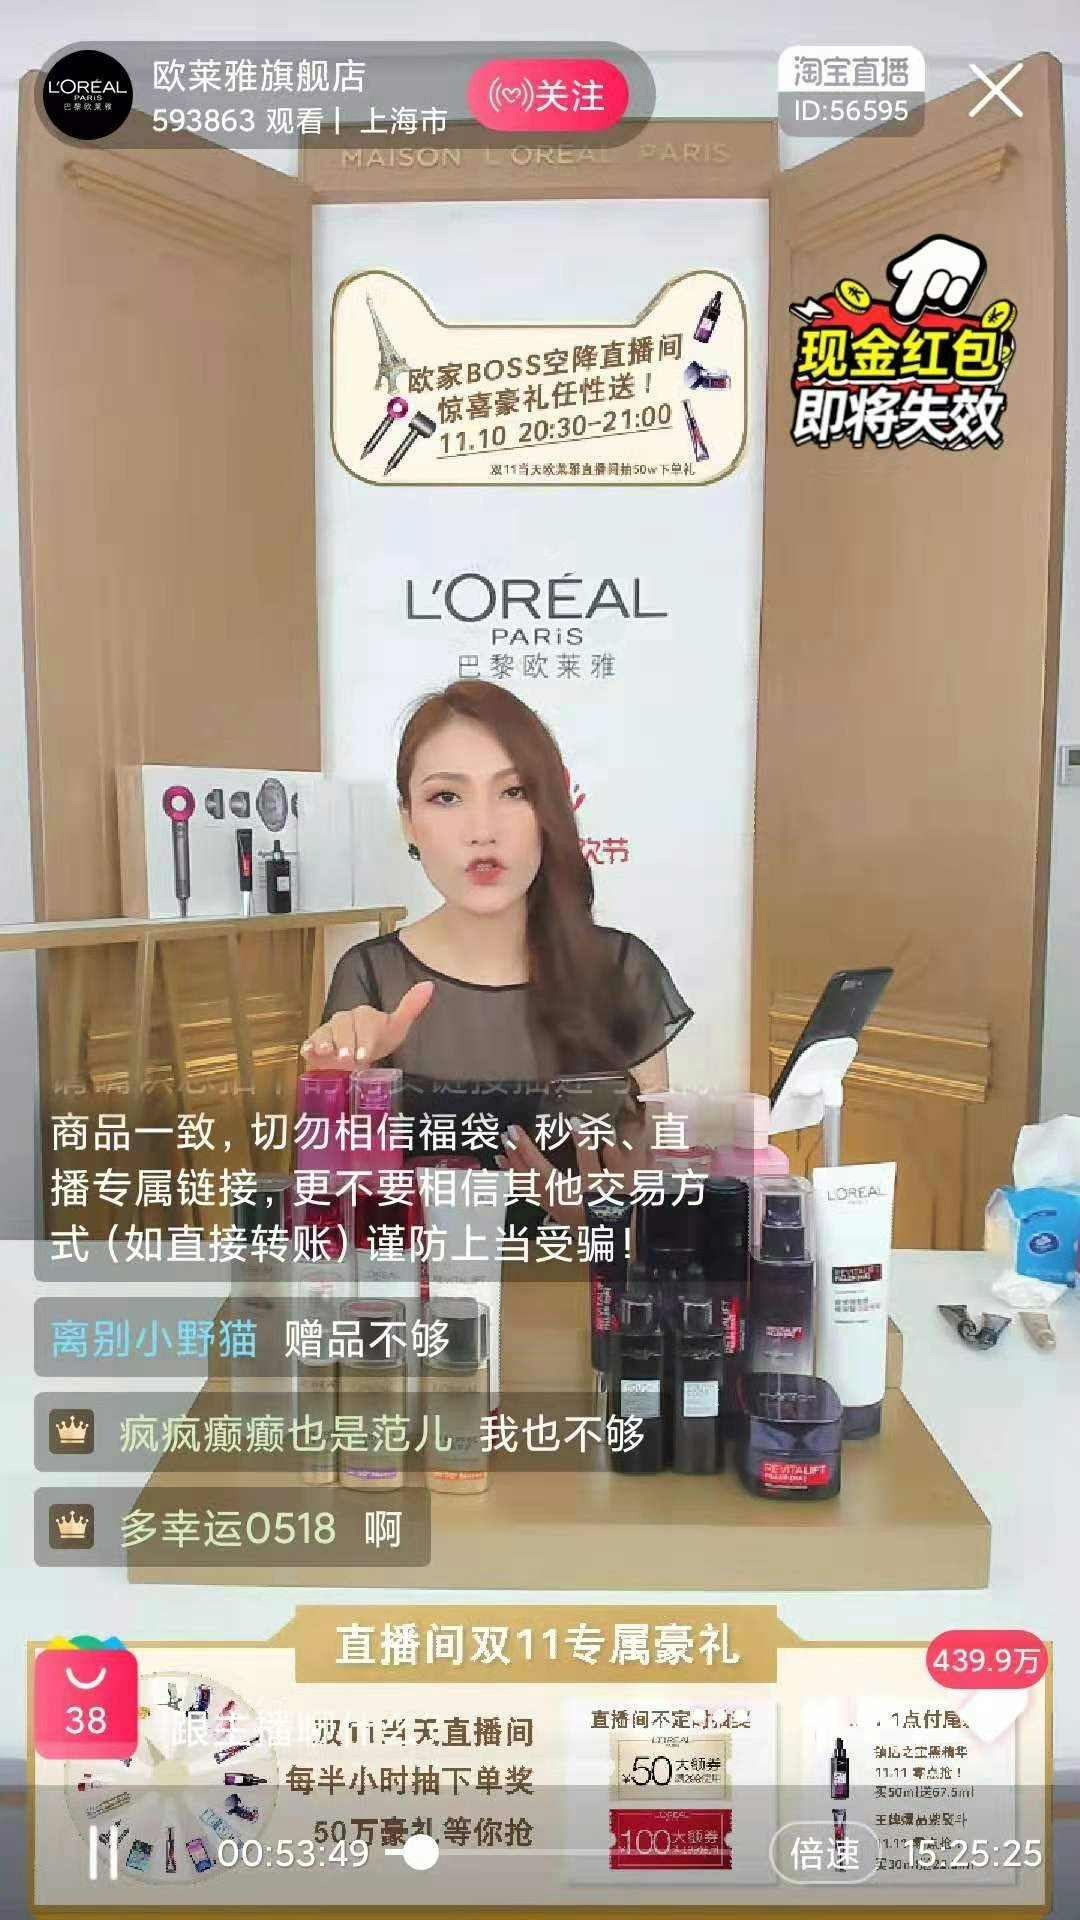 An influencer on L’Oréal's livestreaming channel. Source: Taobao Mobile App